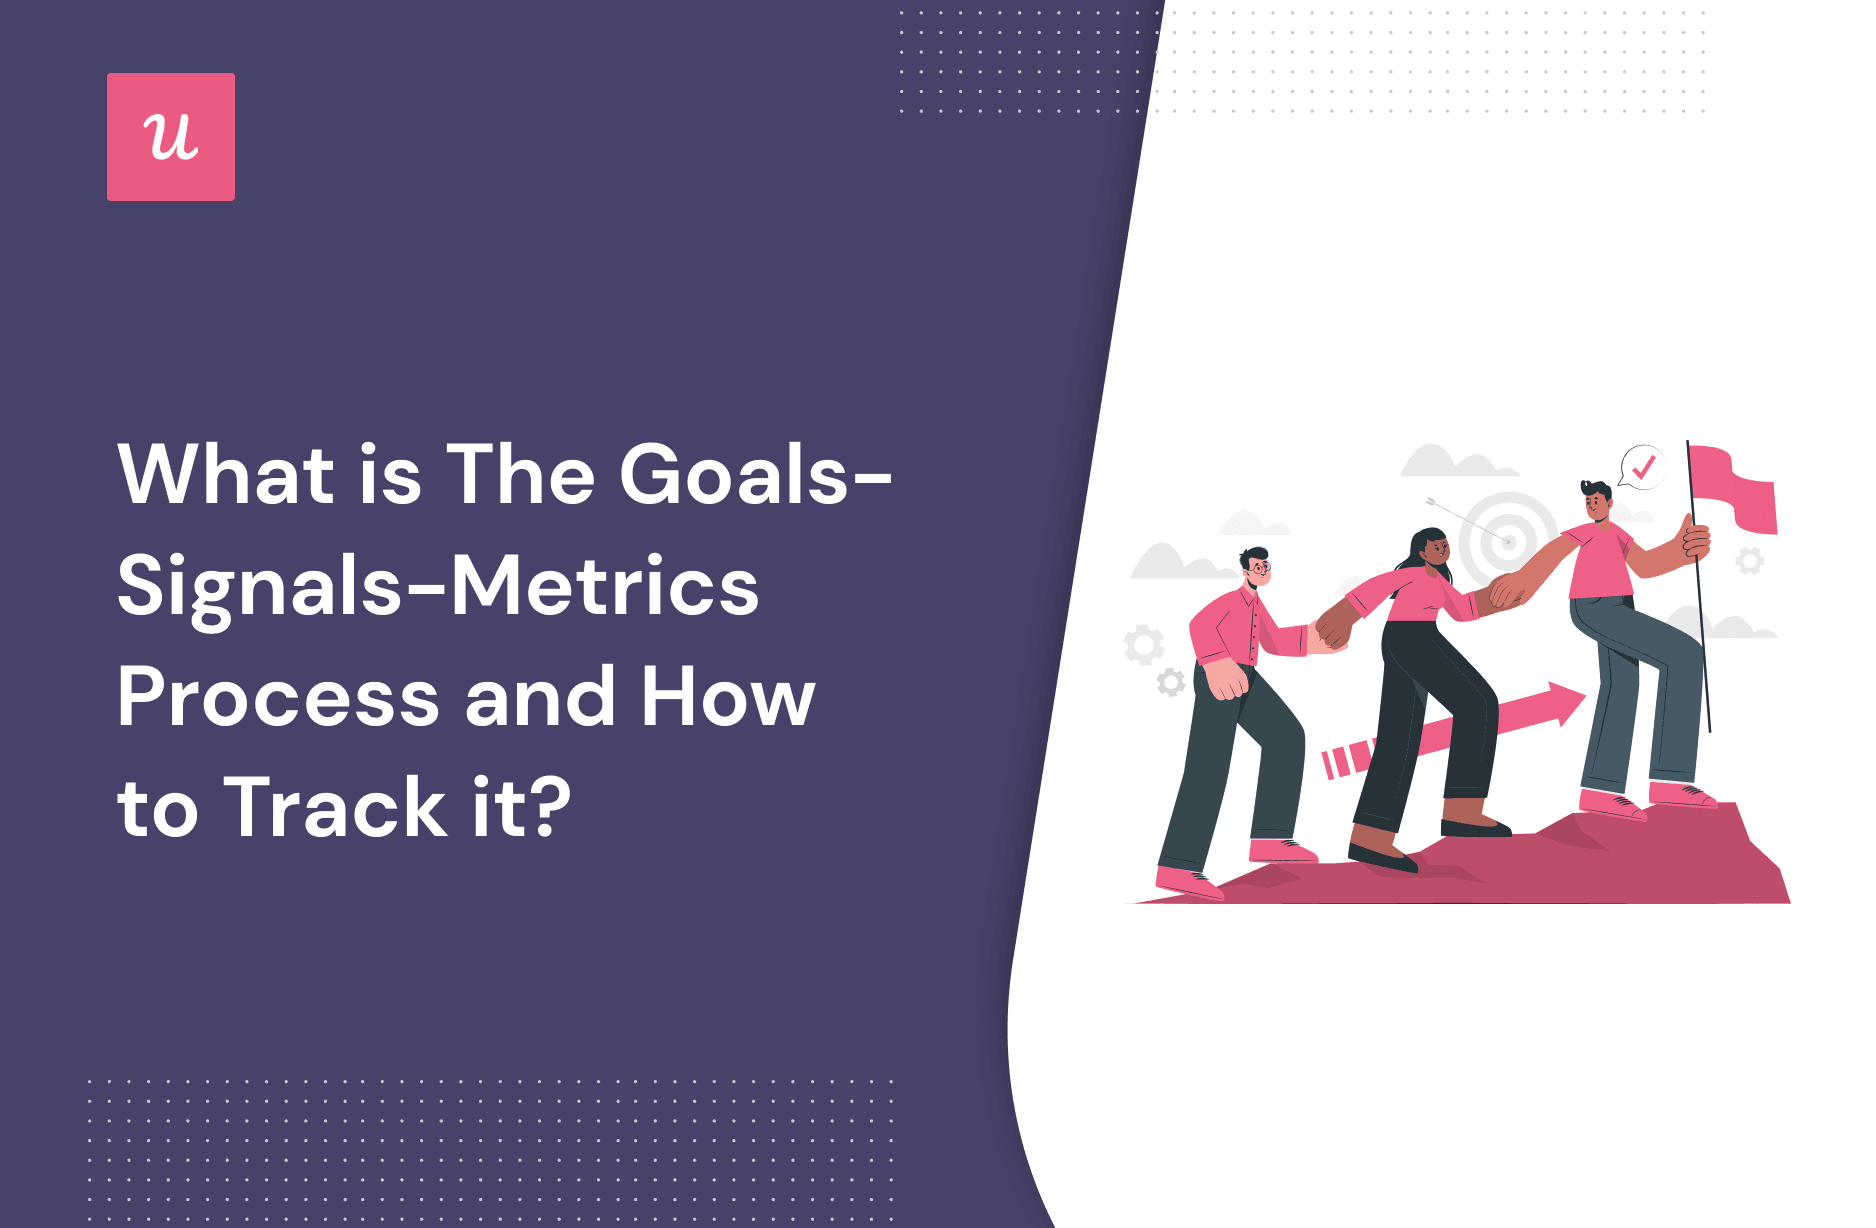 What Is the Goals-Signals-Metrics Process and How To Track It?